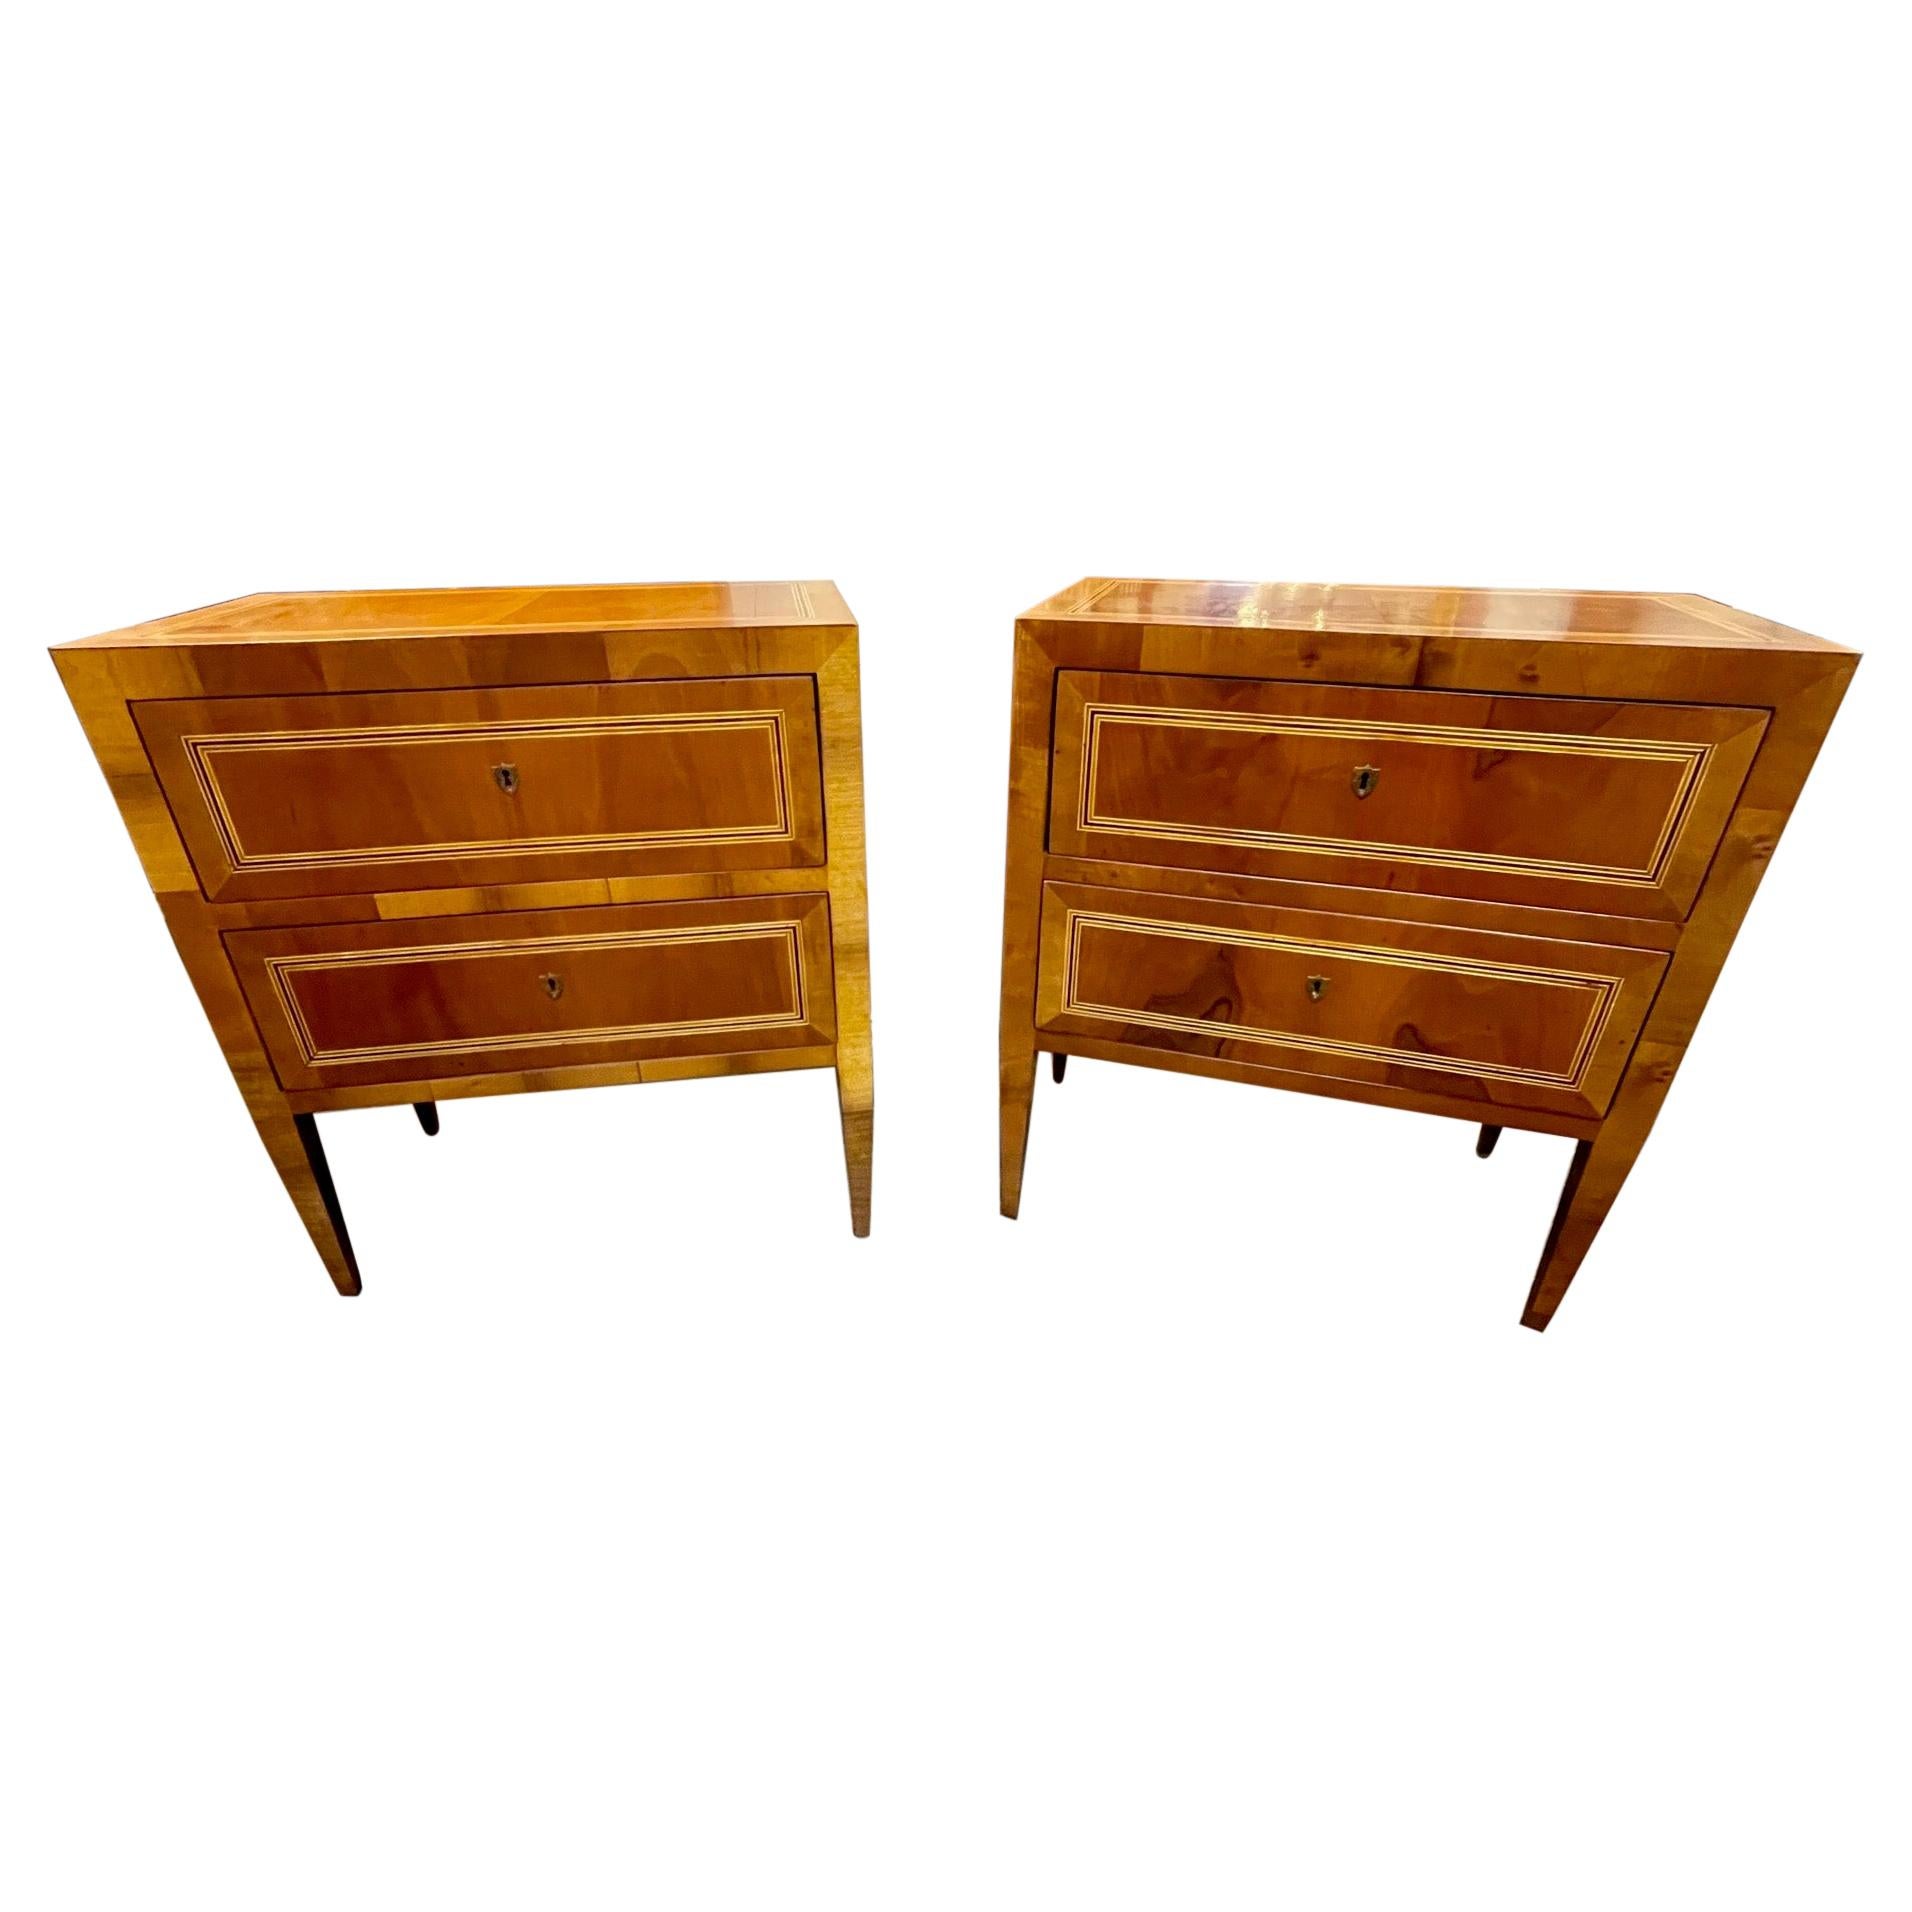 Pair of Italian Walnut Neo-Classical Style Bed Side Tables